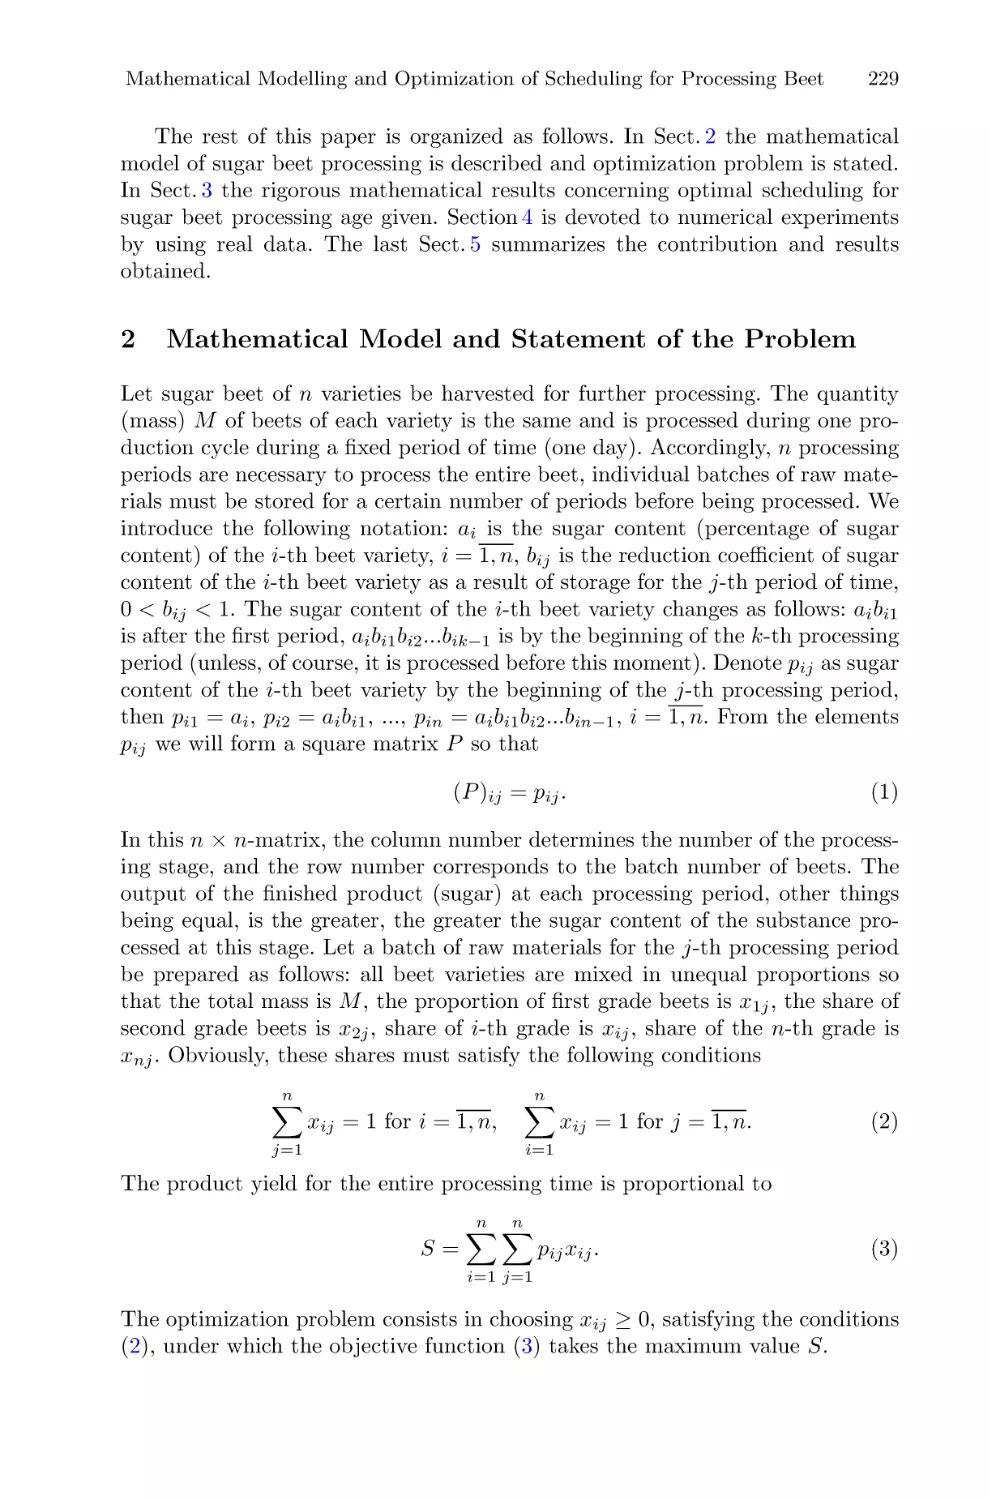 2 Mathematical Model and Statement of the Problem